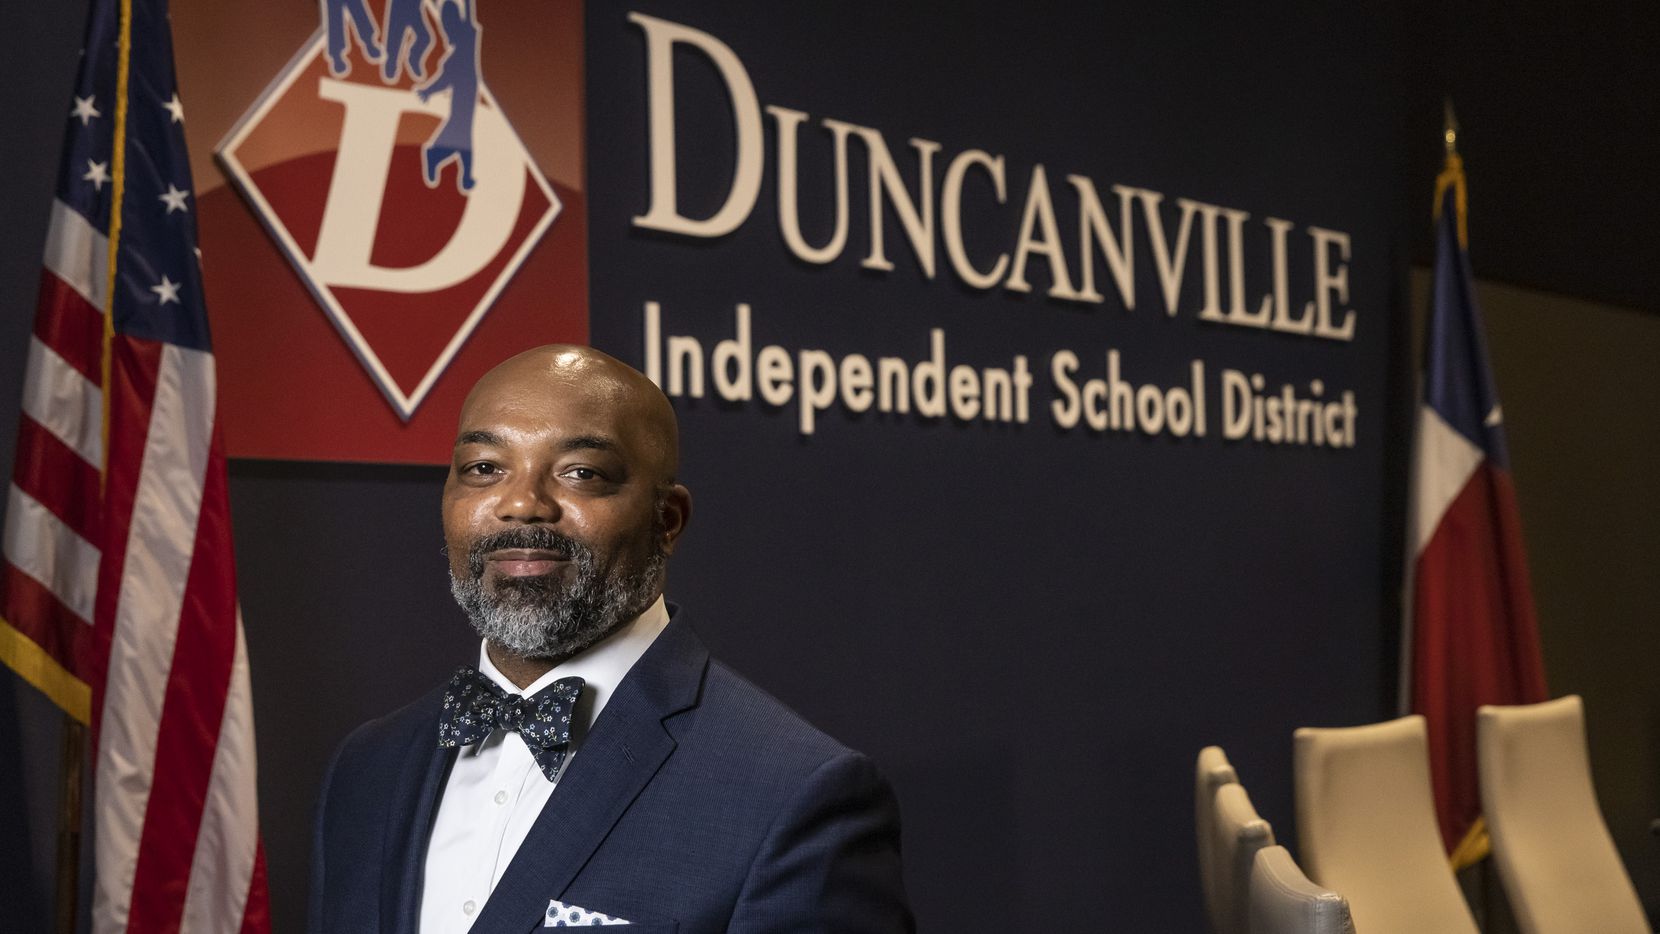 Duncanville ISD Superintendent Marc Smith poses for a portrait in the Duncanville...